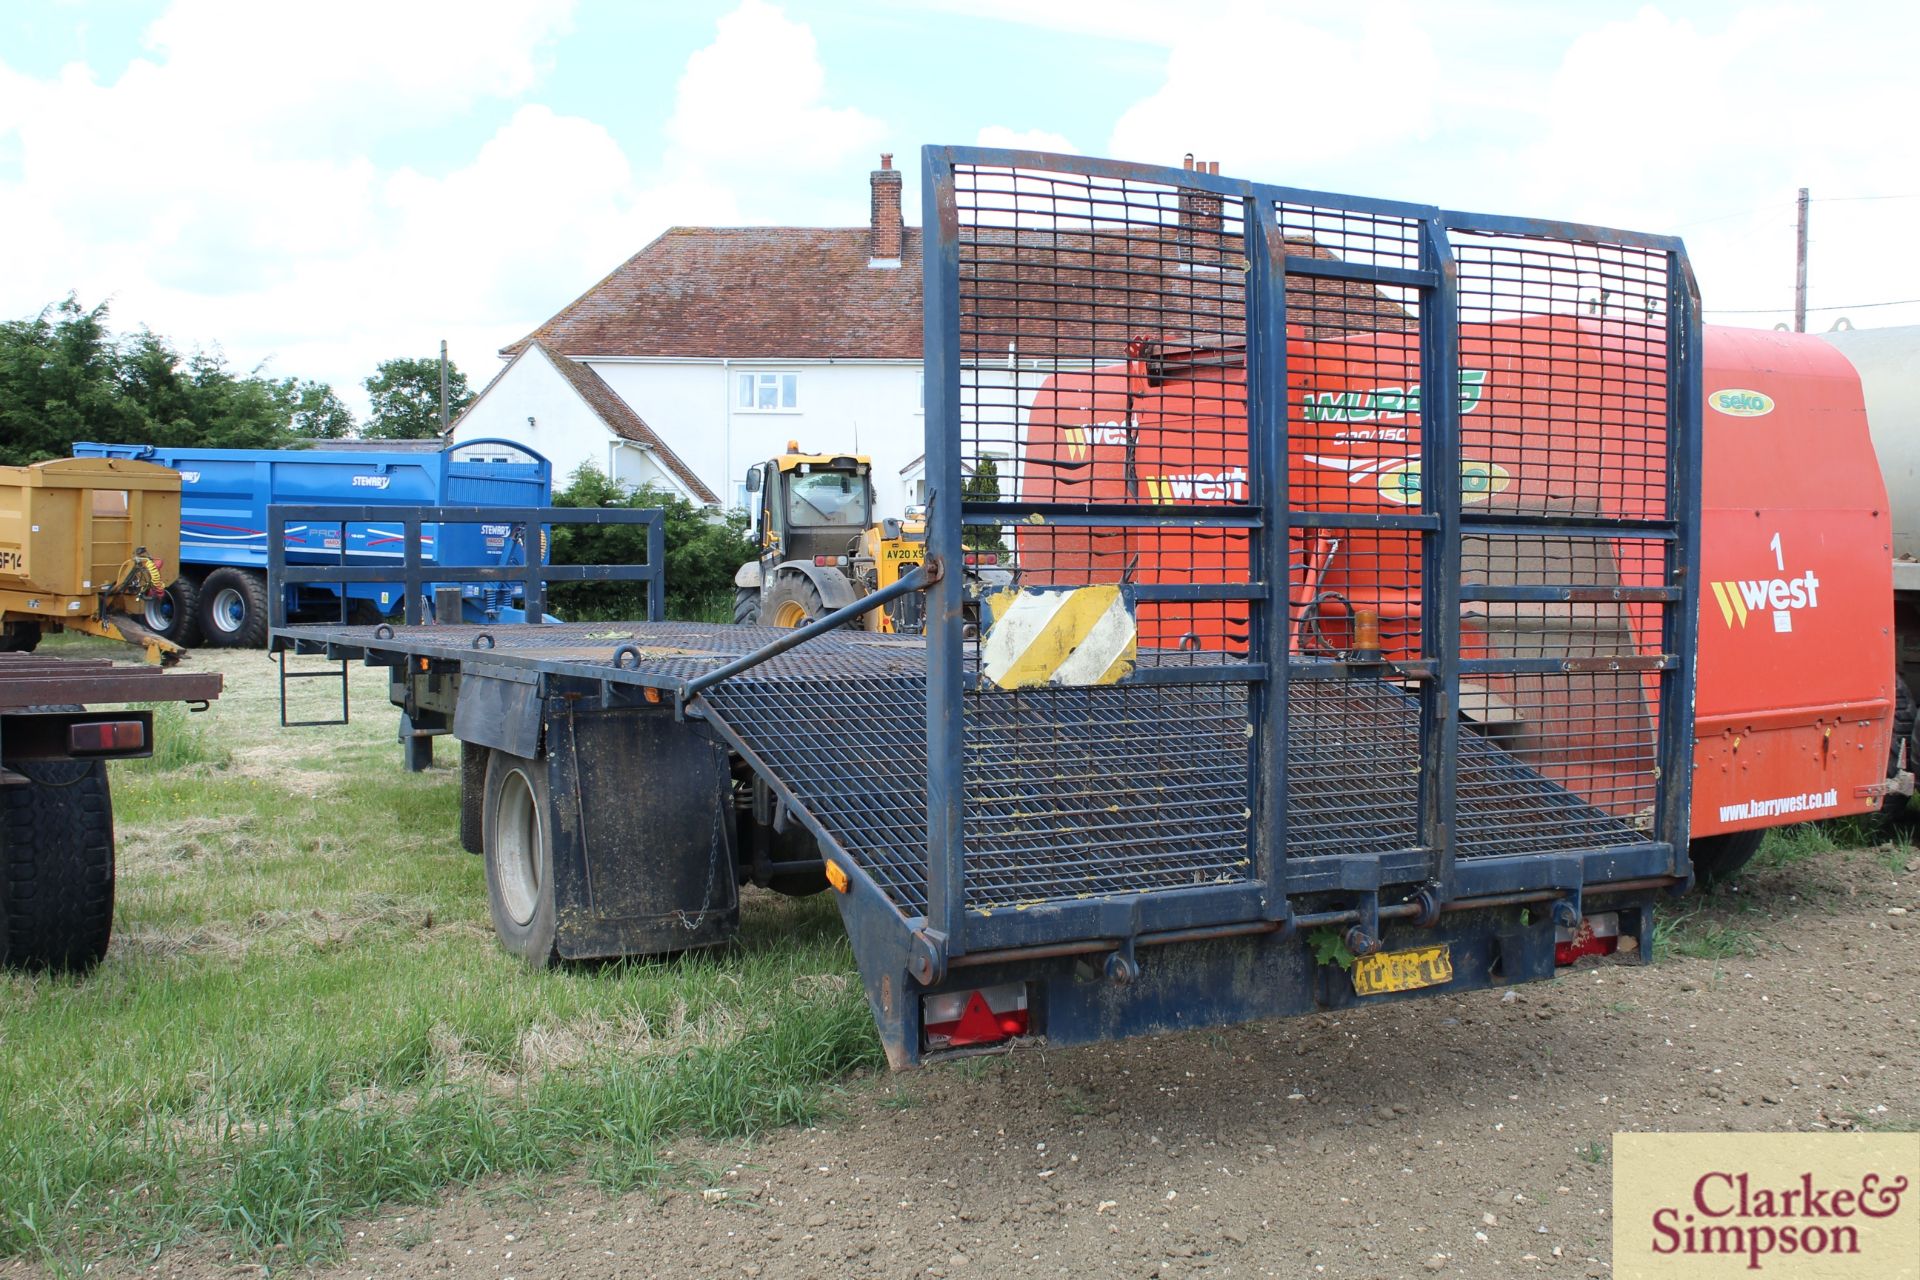 27ft single axle beaver tail trailer. Ex-lorry conversion. With full width mesh ramp and air brakes. - Image 3 of 12